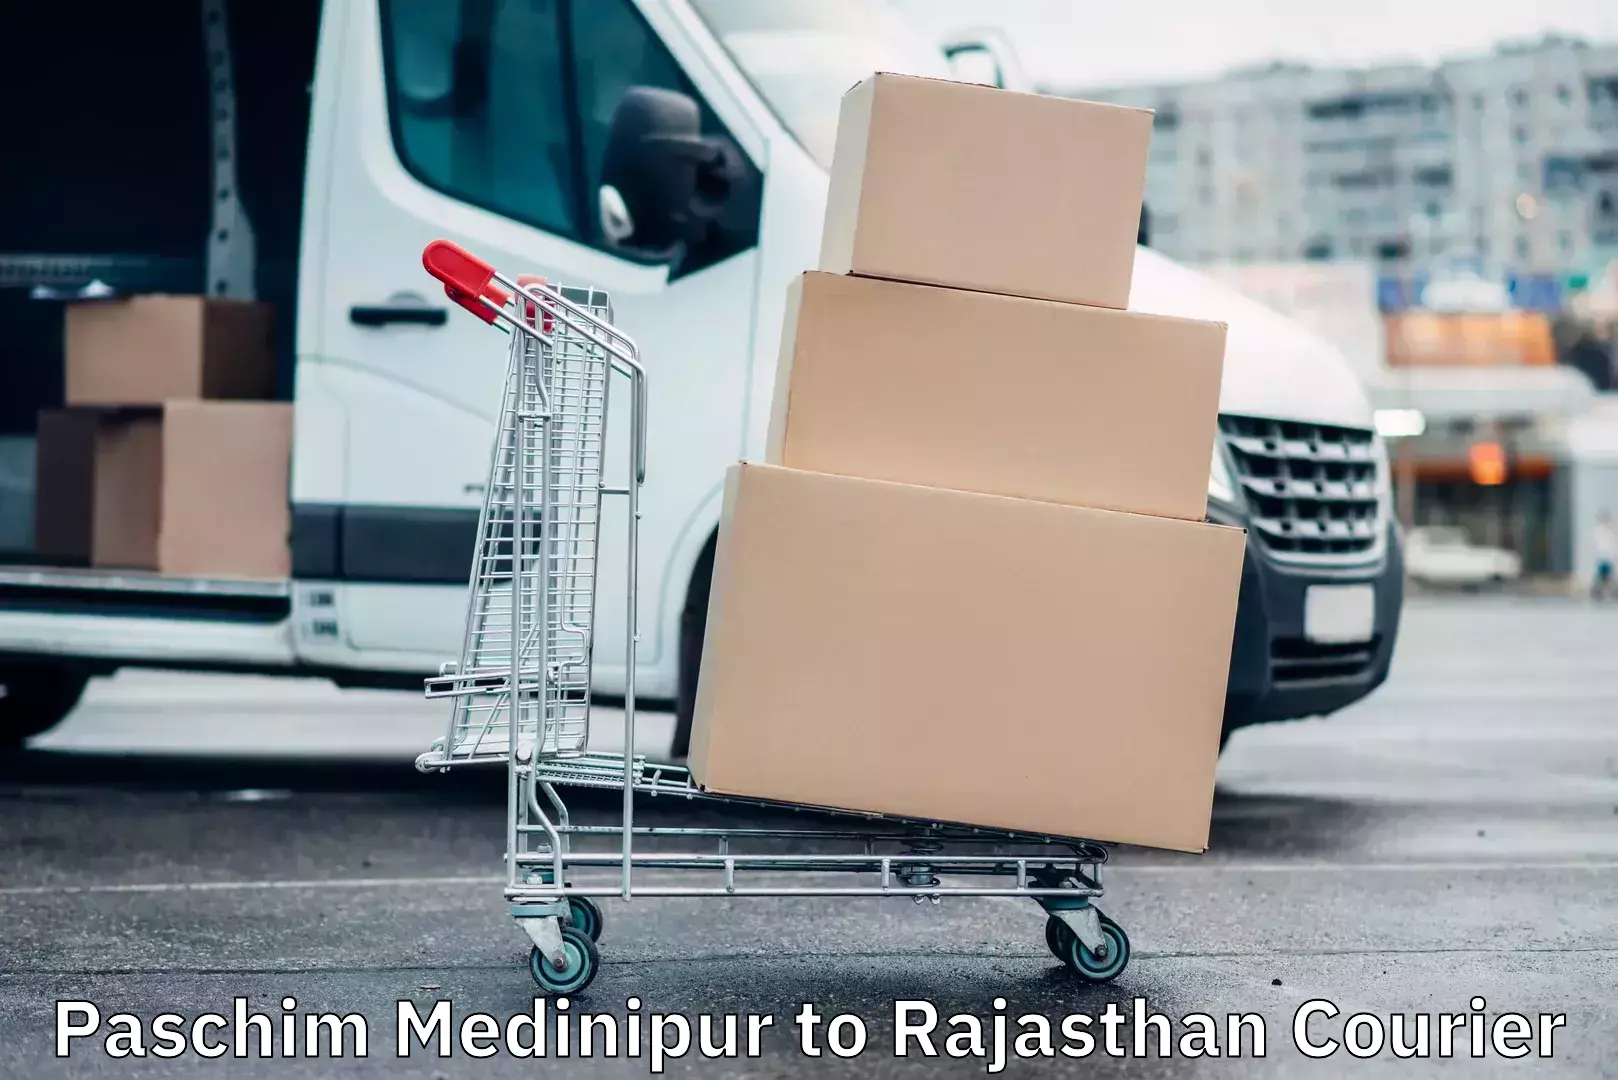 24-hour courier service Paschim Medinipur to Rajasthan